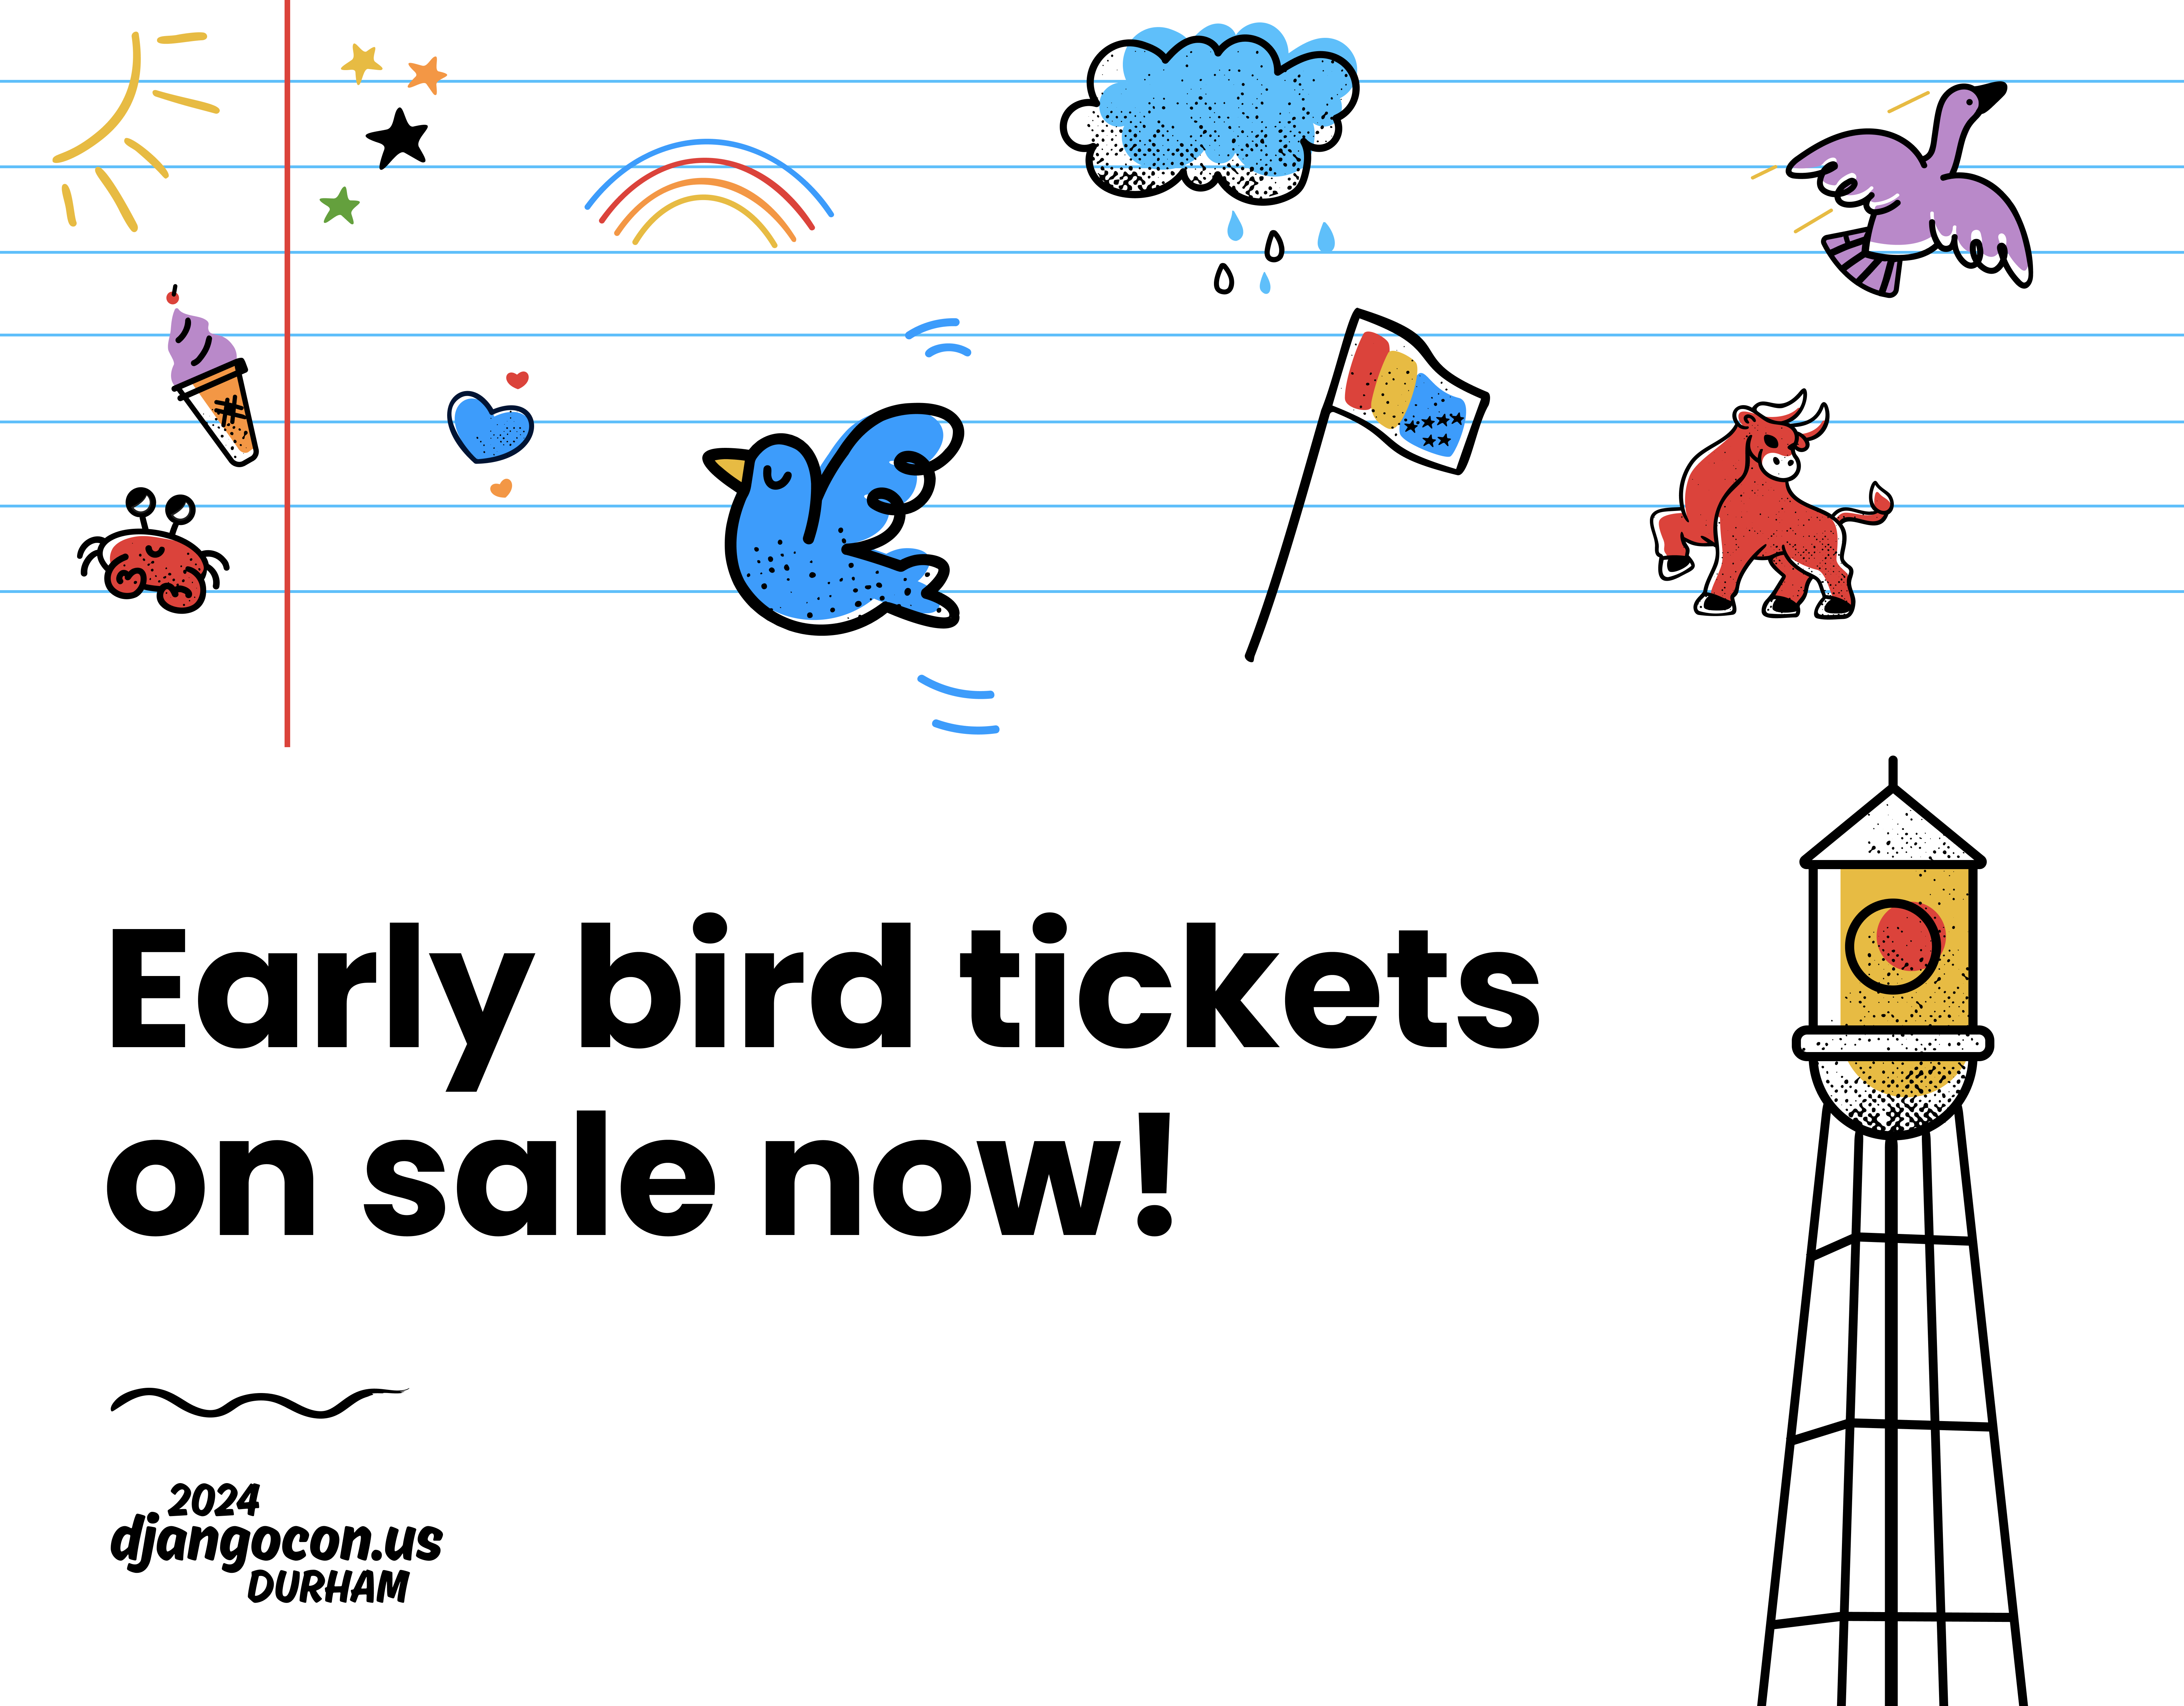 Early-bird tickets now on sale!